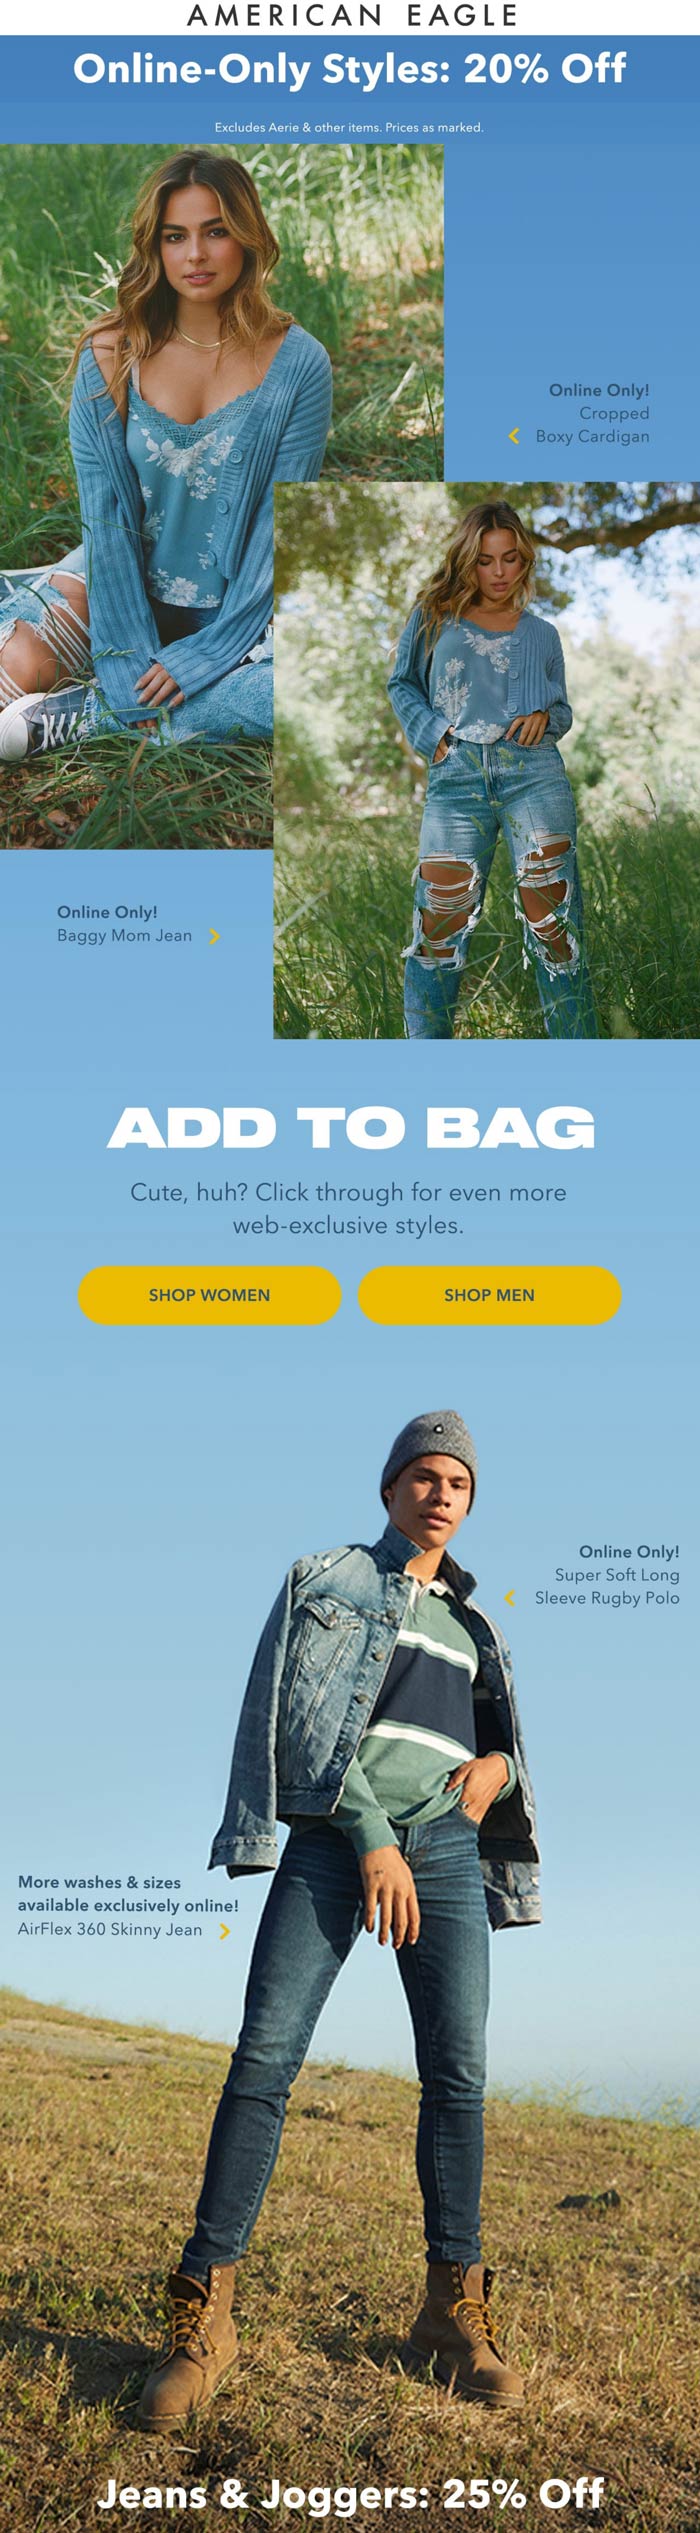 American Eagle stores Coupon  20% off online styles today at American Eagle #americaneagle 